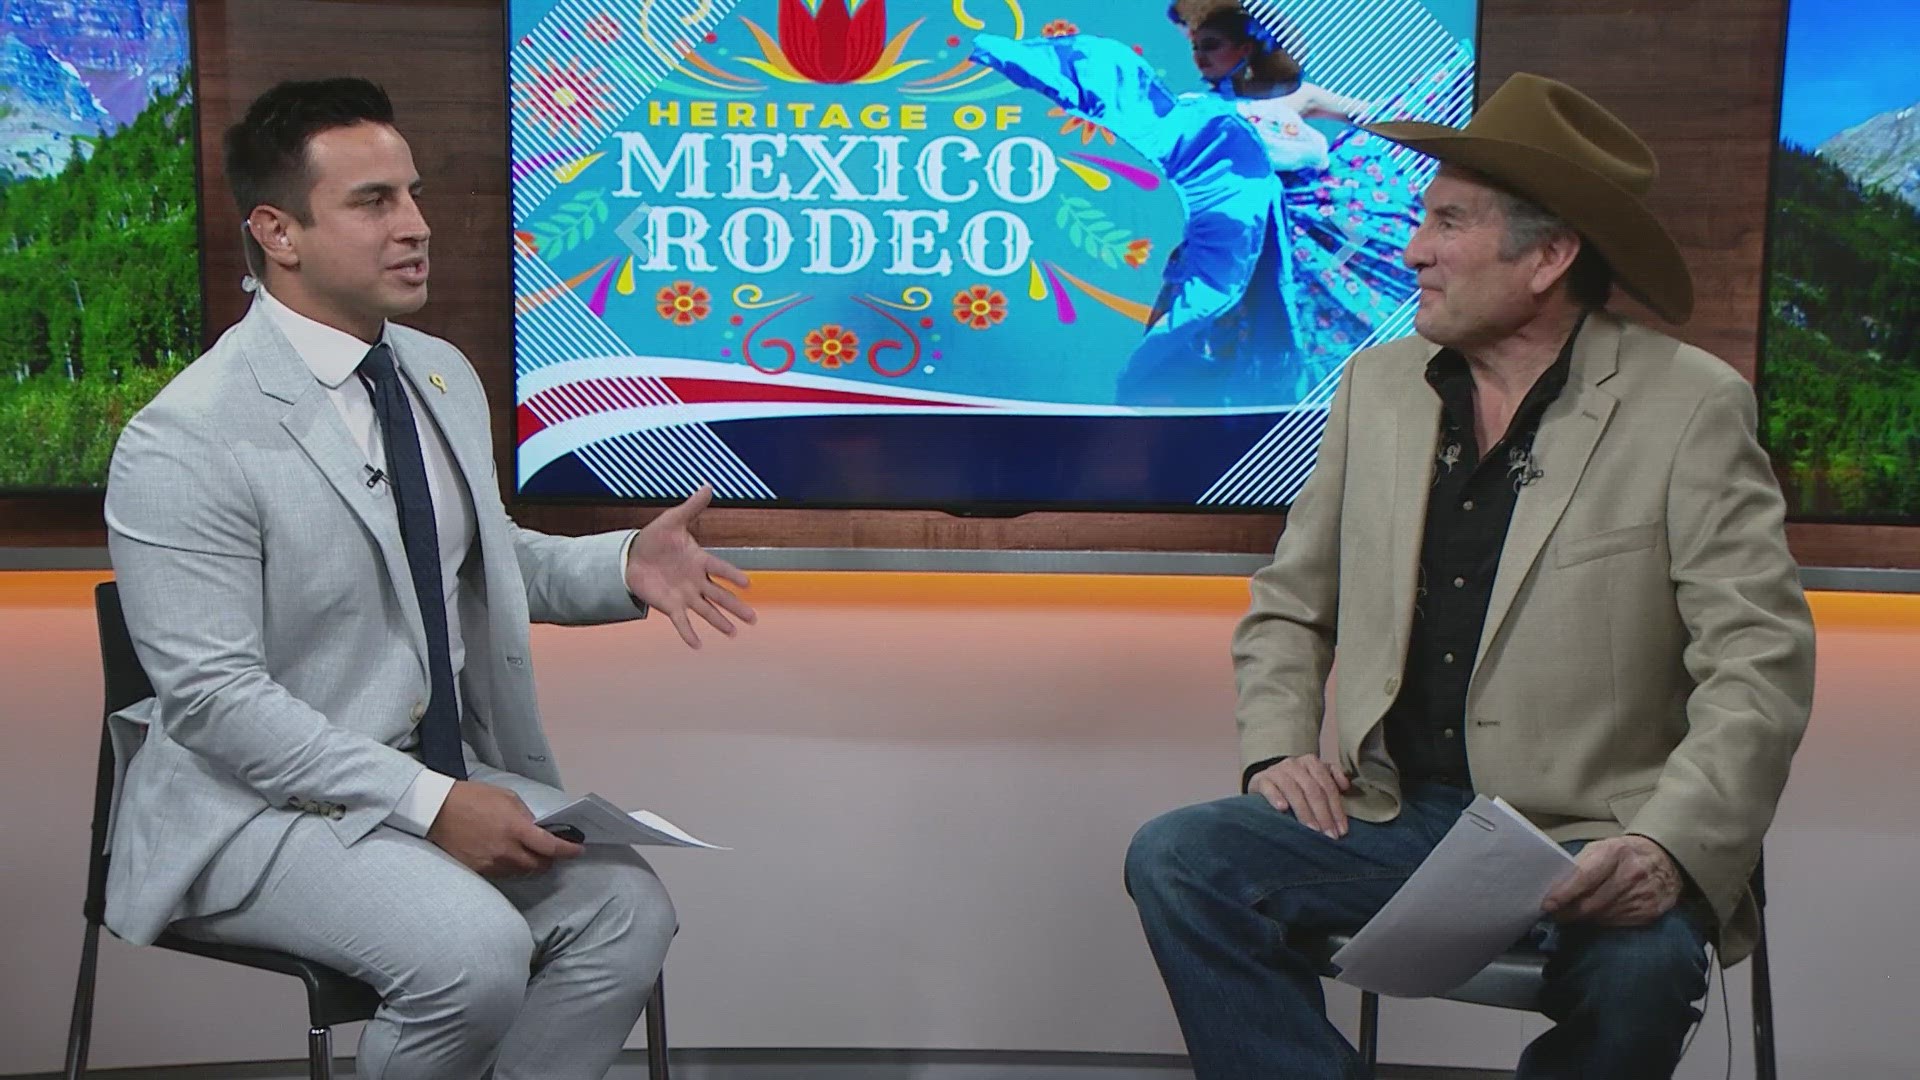 The Herigatige of Mexico Rodeo will have a special two hour performance on Sunday, July 2, at 2 p.m.